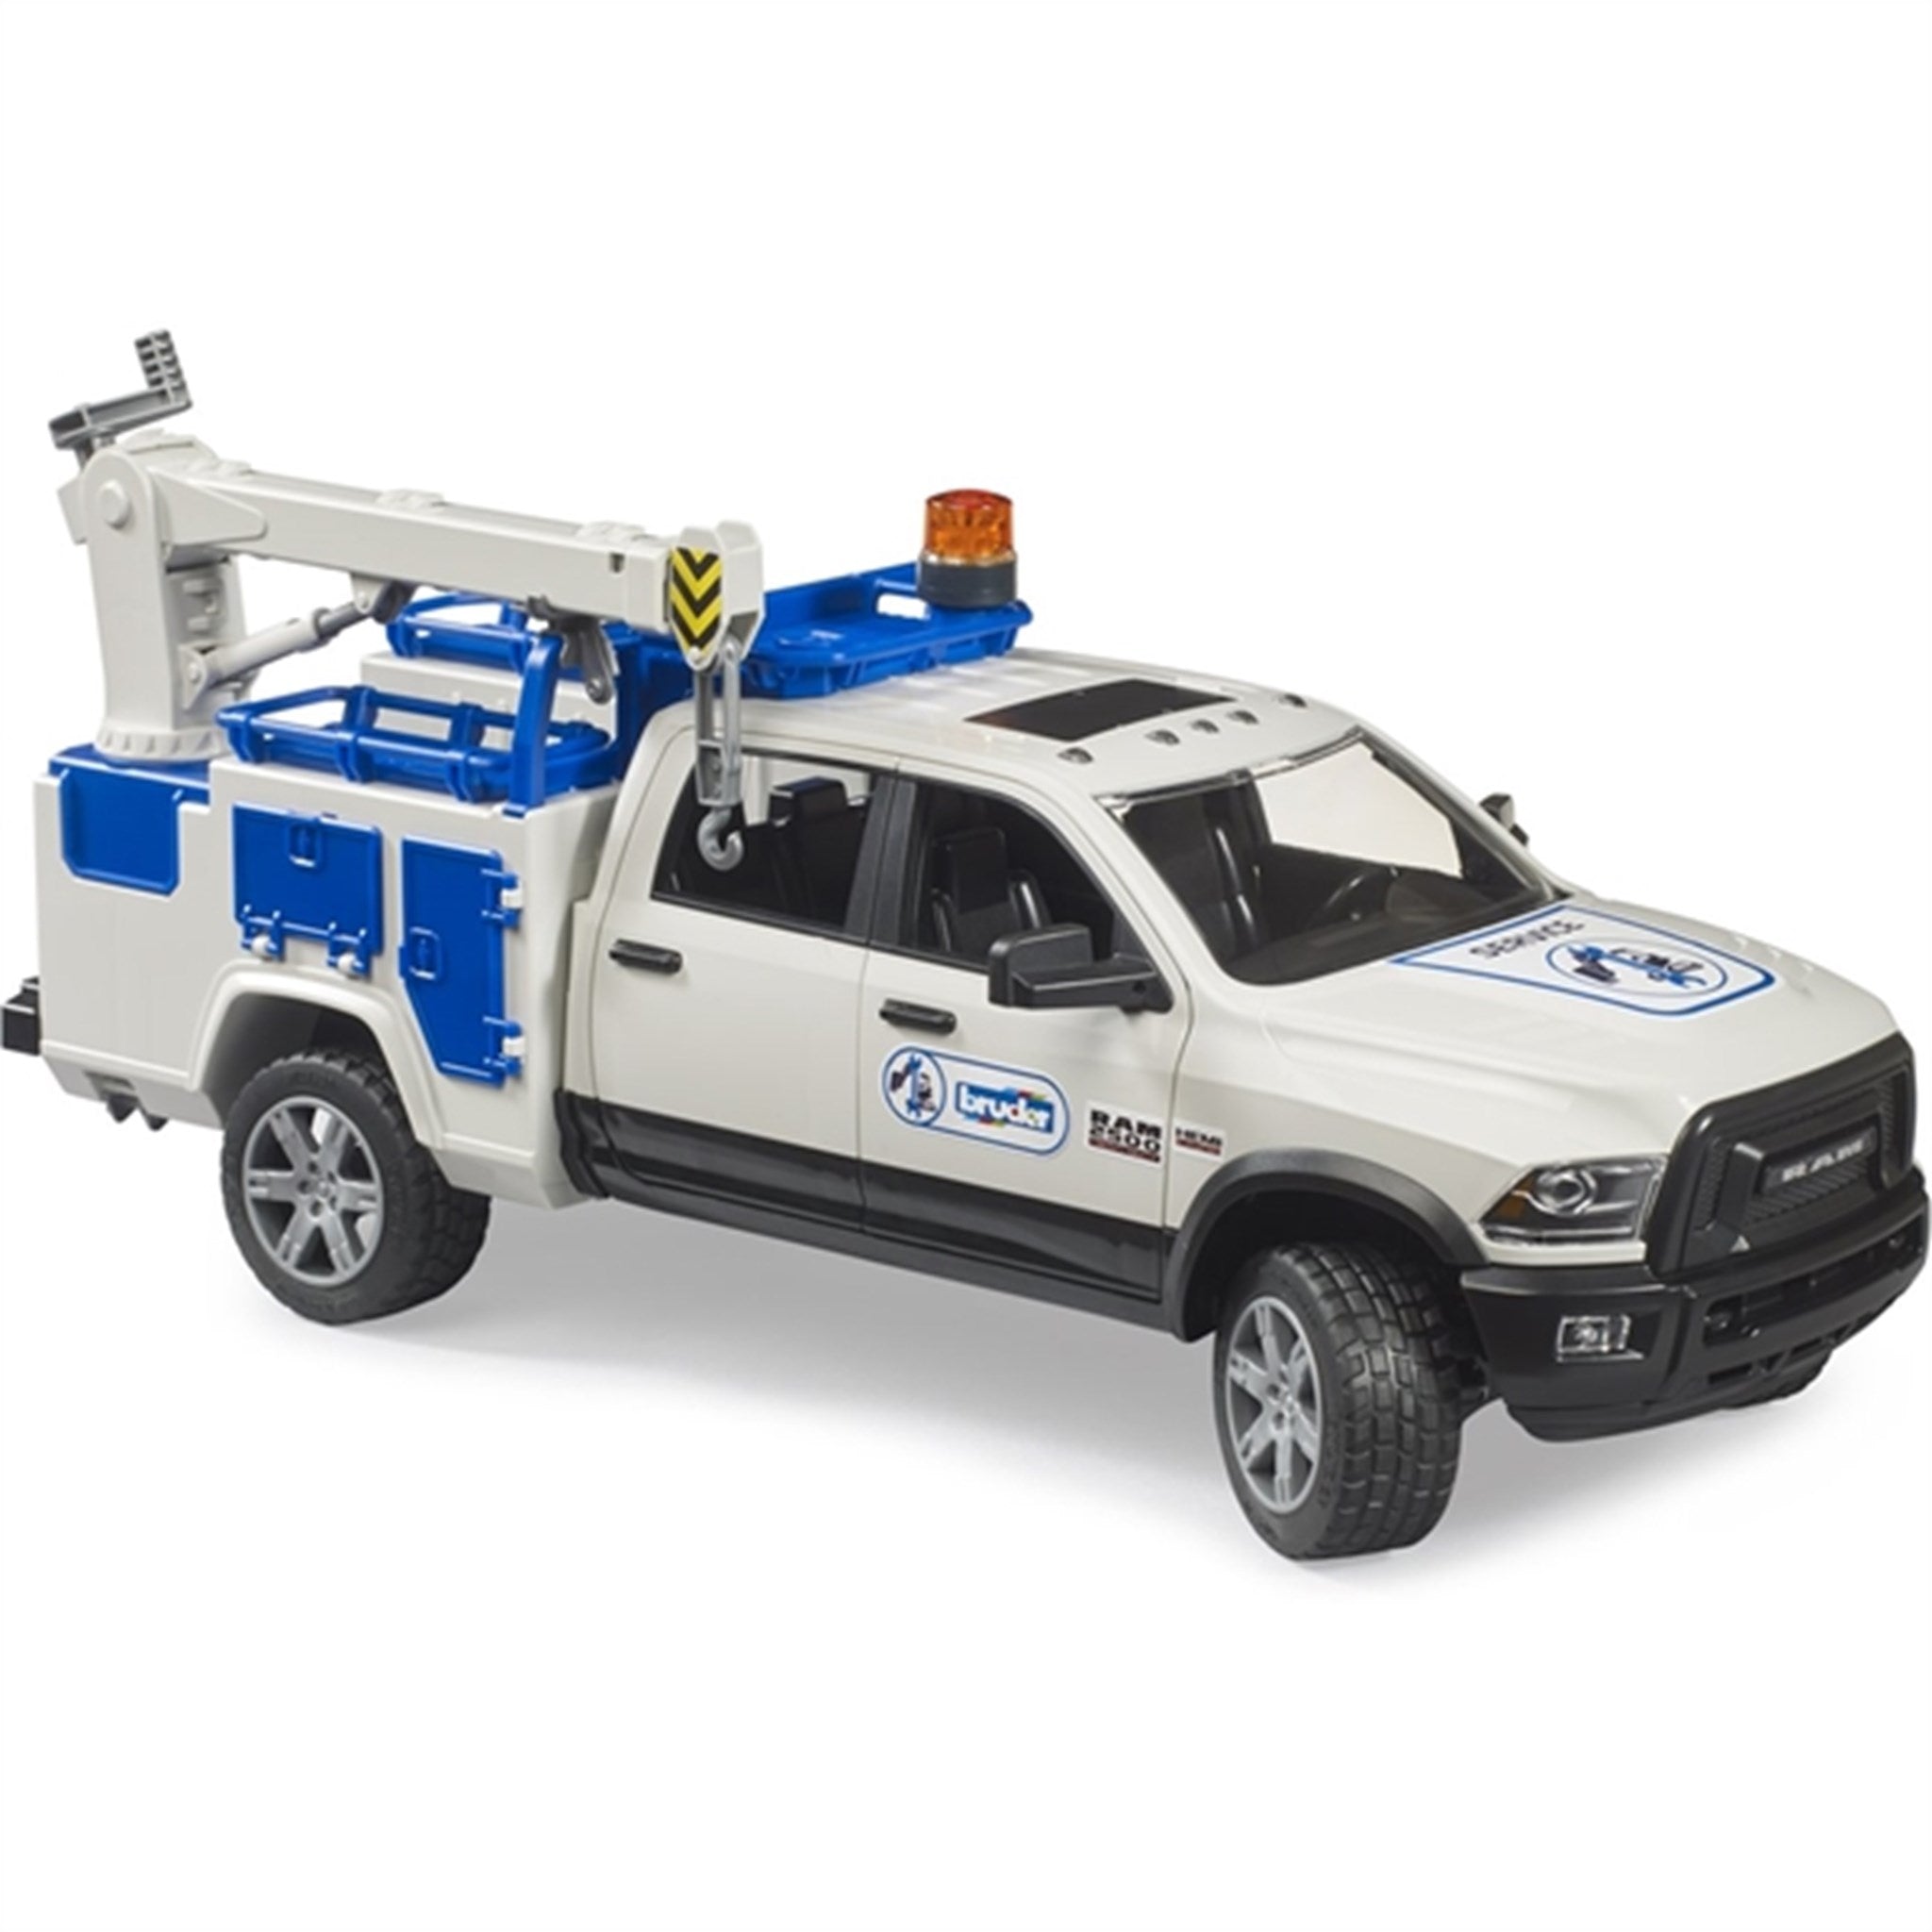 Bruder RAM 2500 Service Truck with Rotating Beacon Light 6